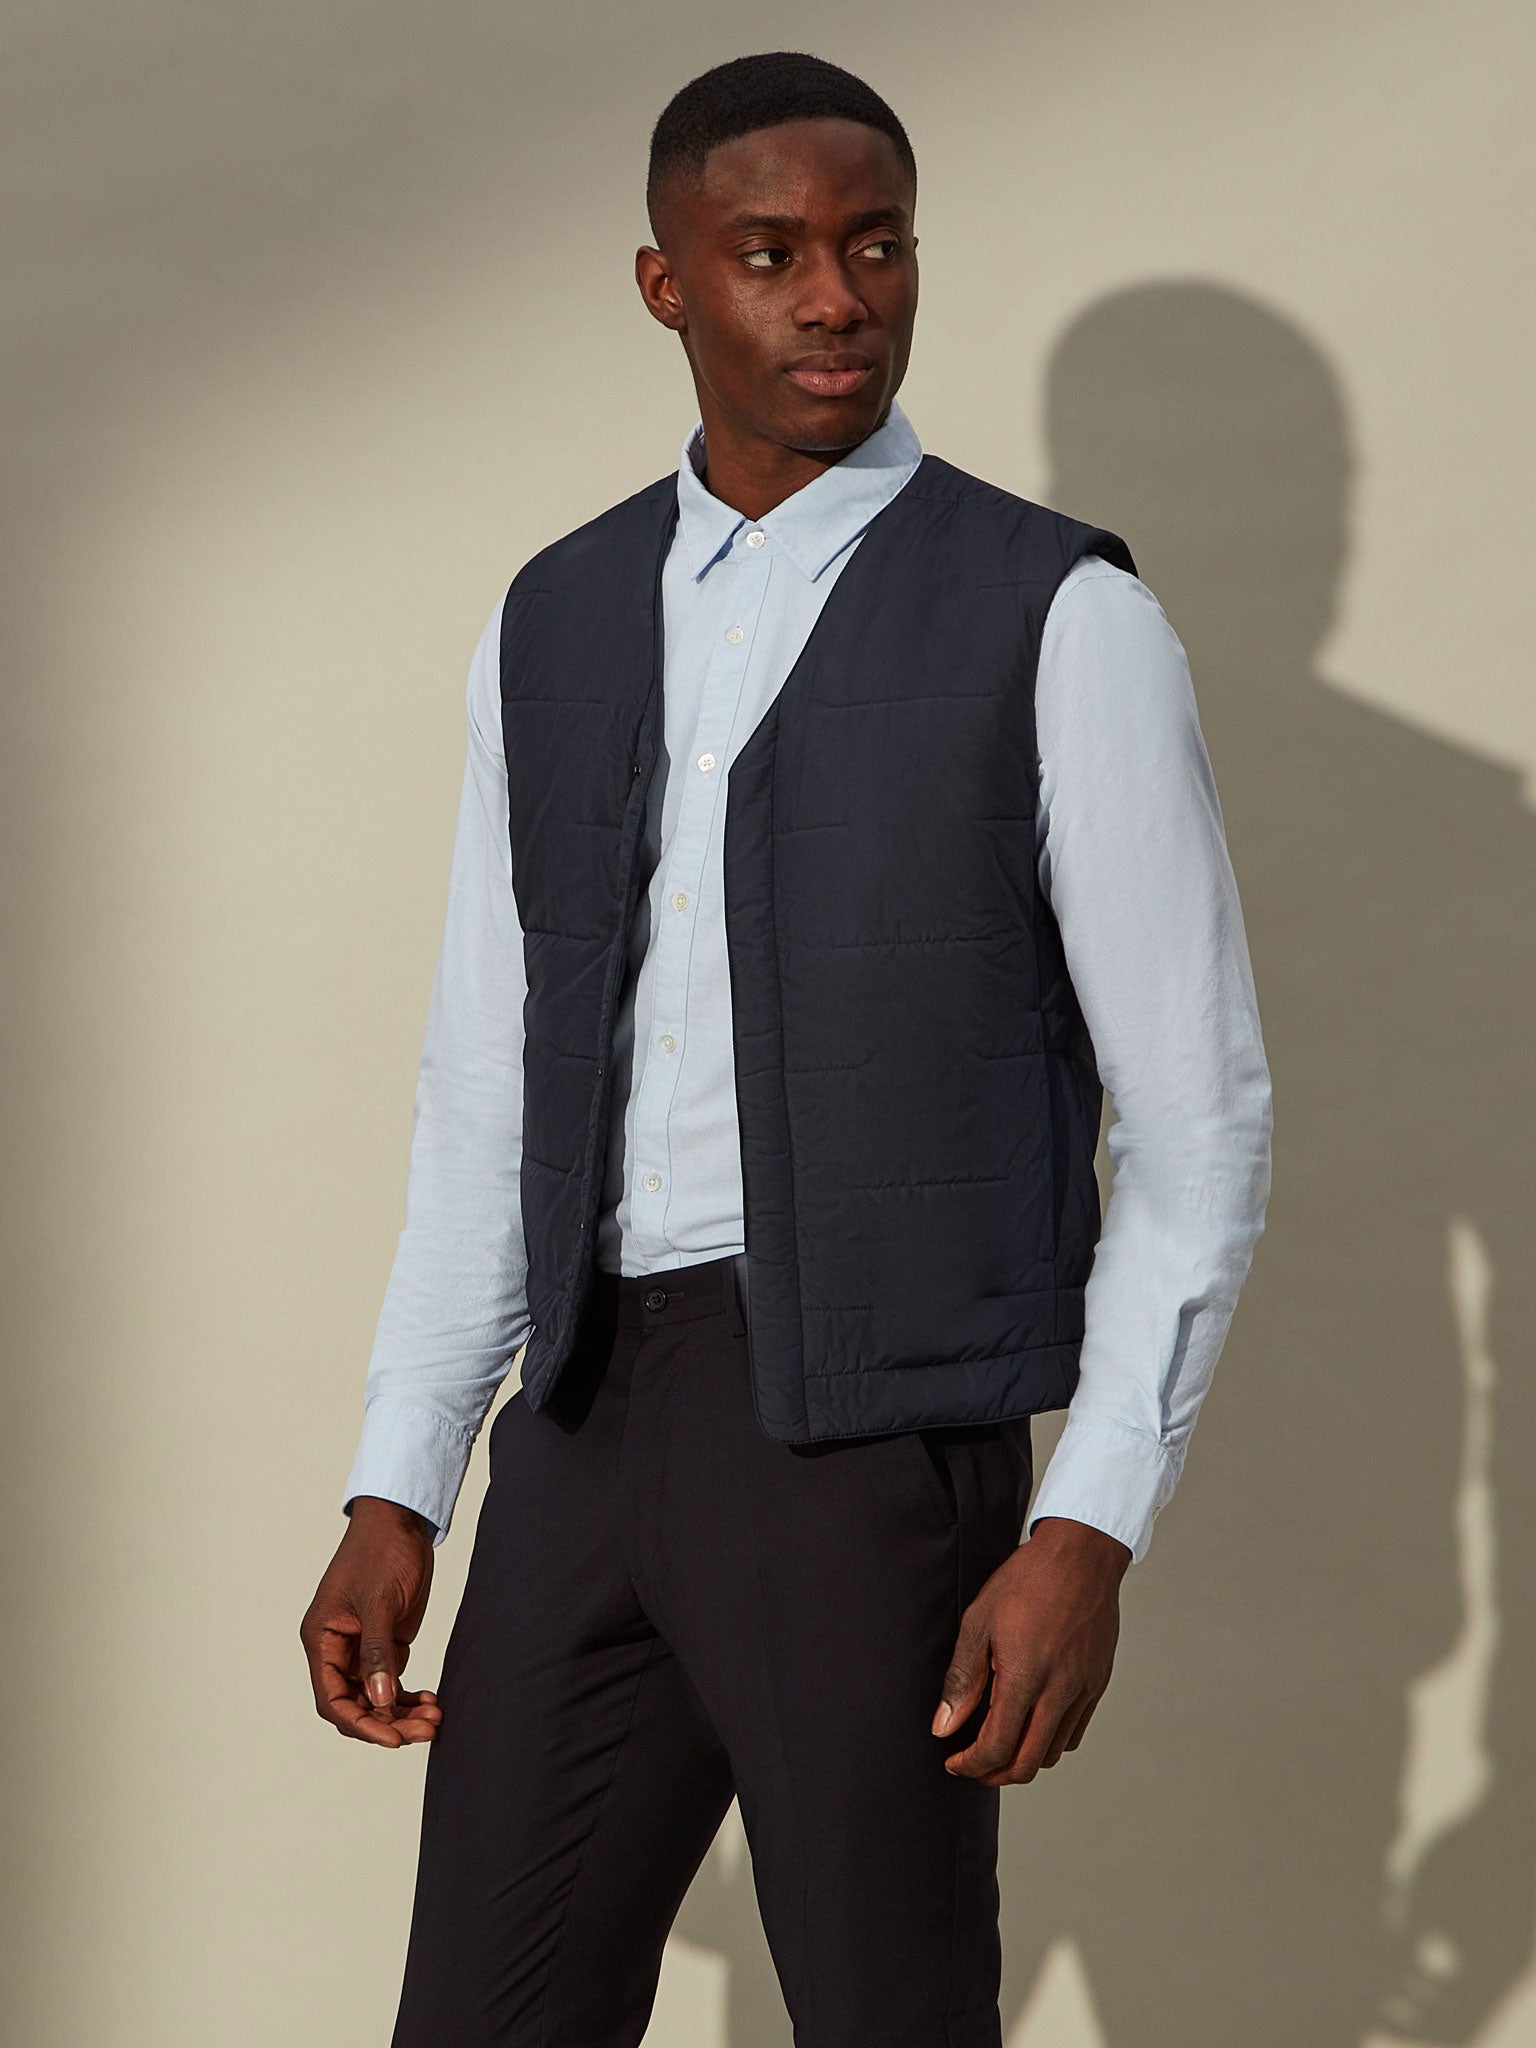 Stay on Trend with this navy Blue Gilet - An Essential Addition to Your Winter Wardrobe